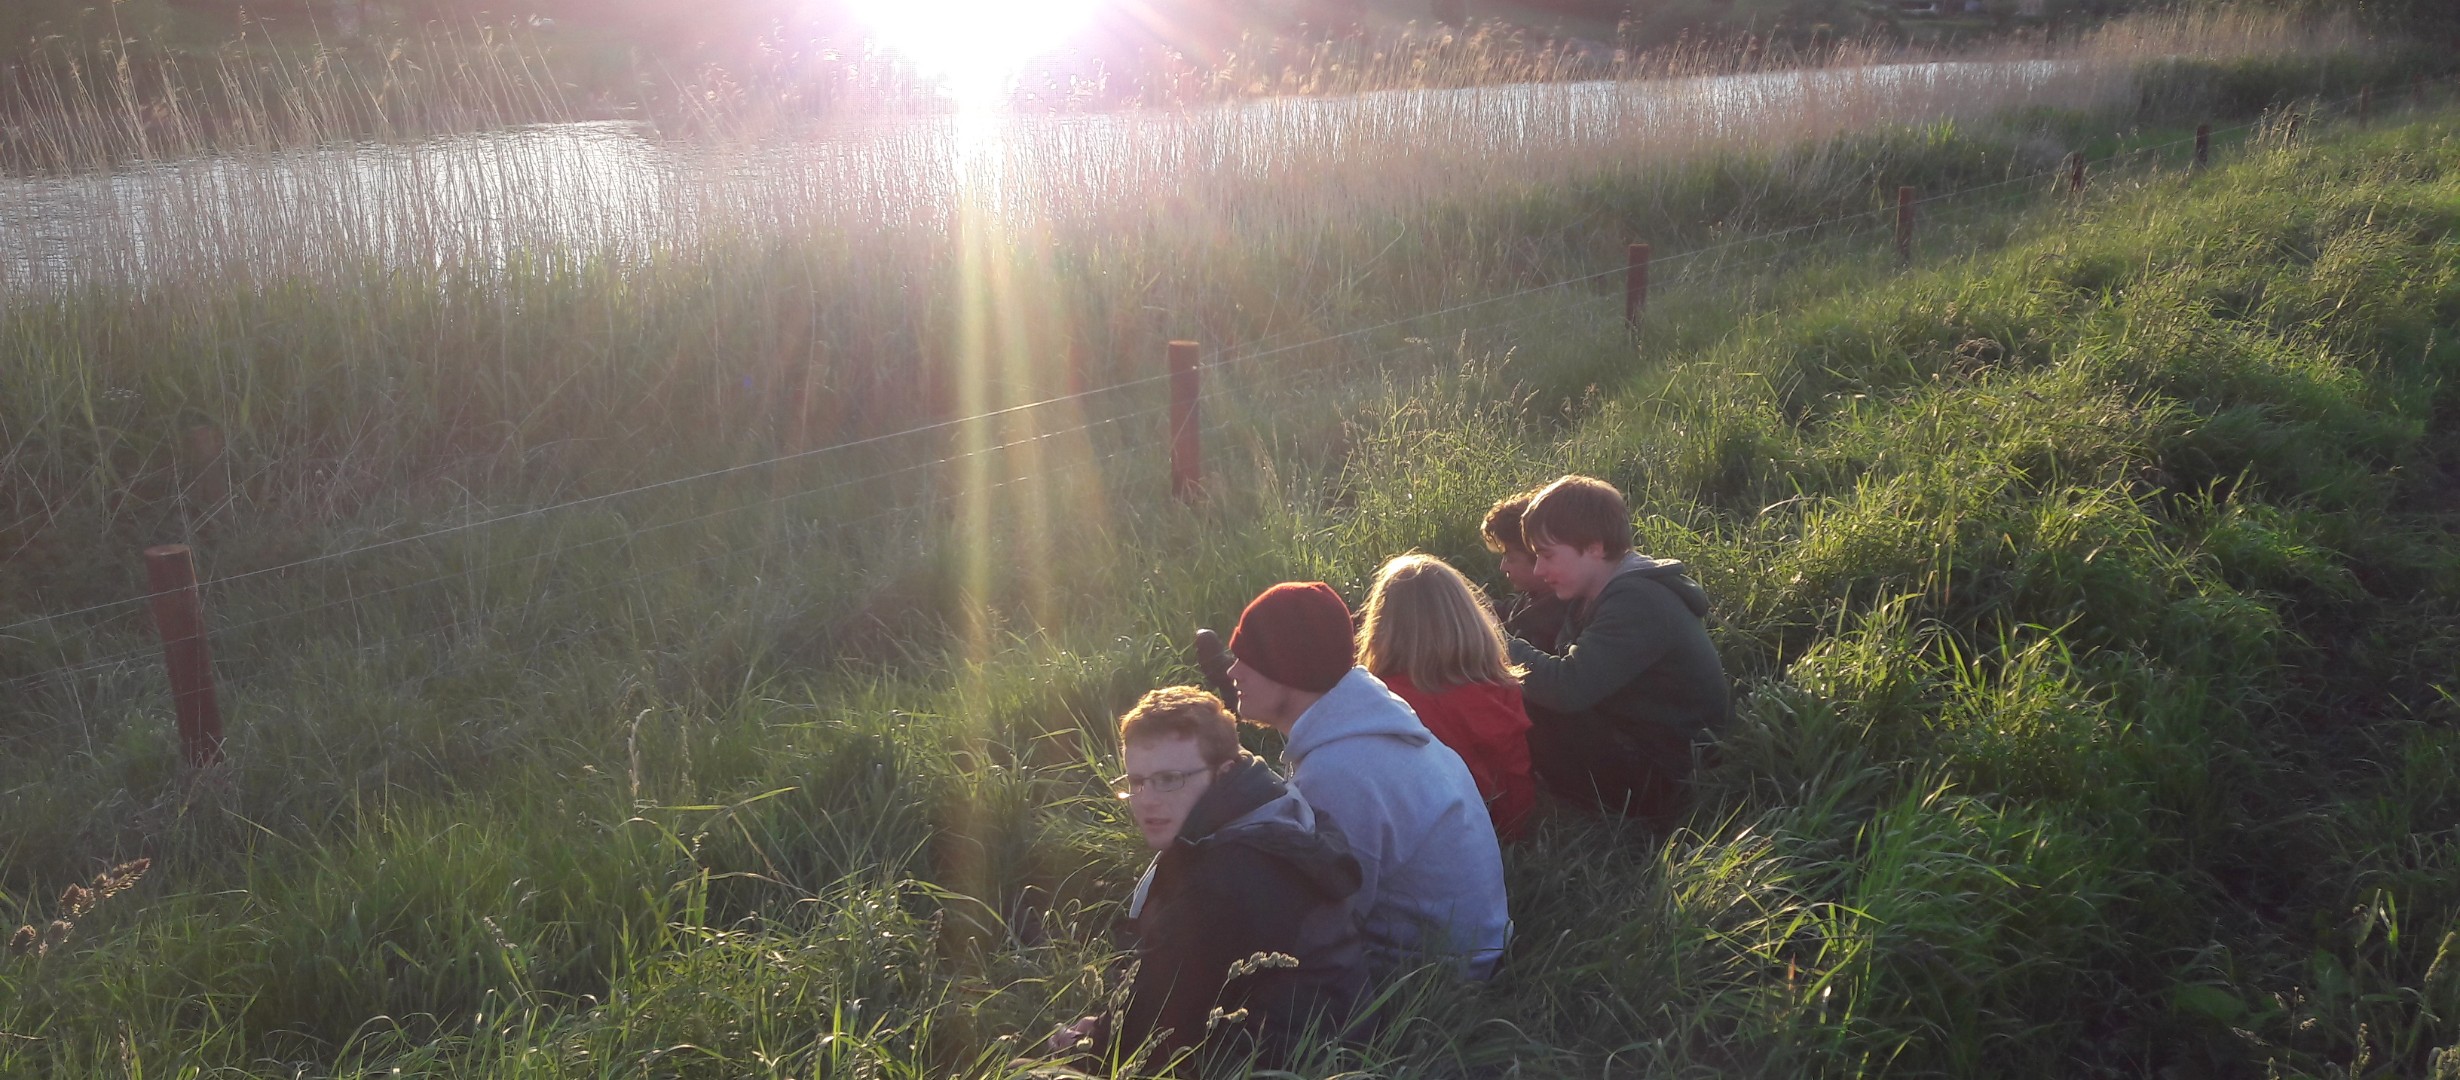 Four young people sat in a line together on long grass in the foreground, overlooking a river reflecting a low sun in the background